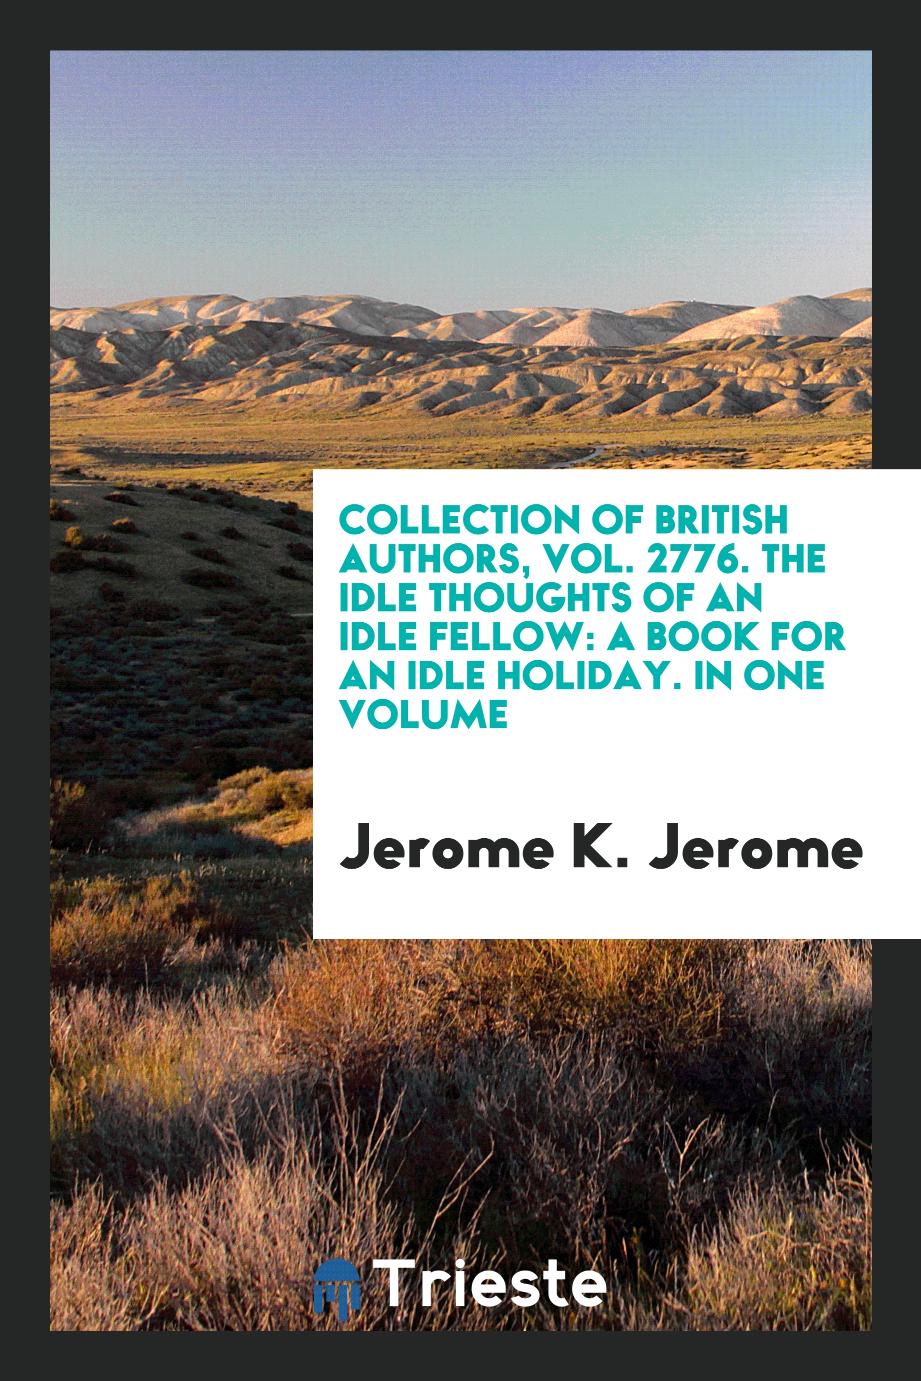 Collection of British Authors, Vol. 2776. The idle thoughts of an idle fellow: a book for an idle holiday. In One Volume